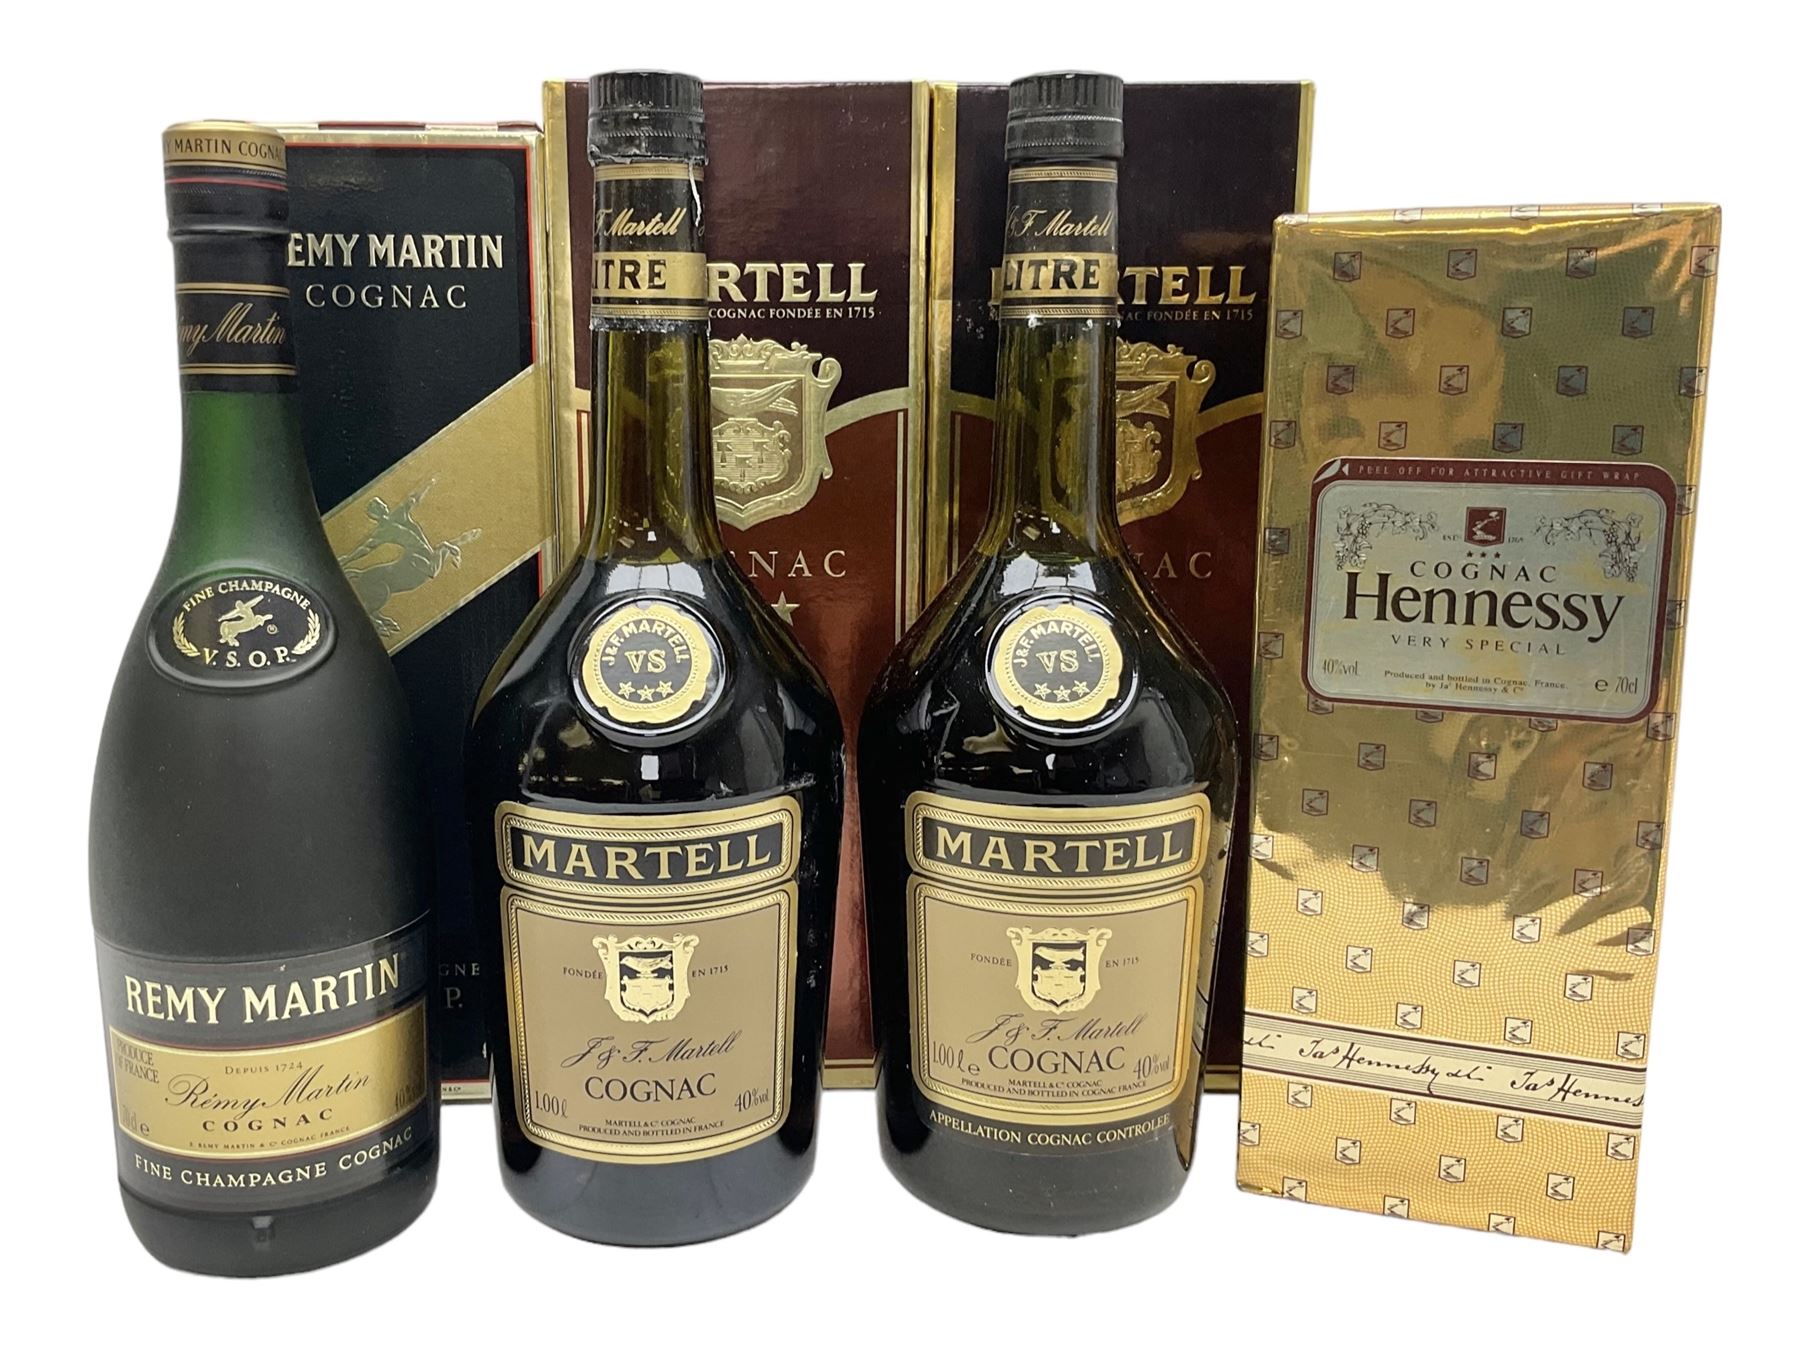 Hennessy Very Special Cognac, Martell 40% wrap presentation one vol, bottle, 70cl gift in box